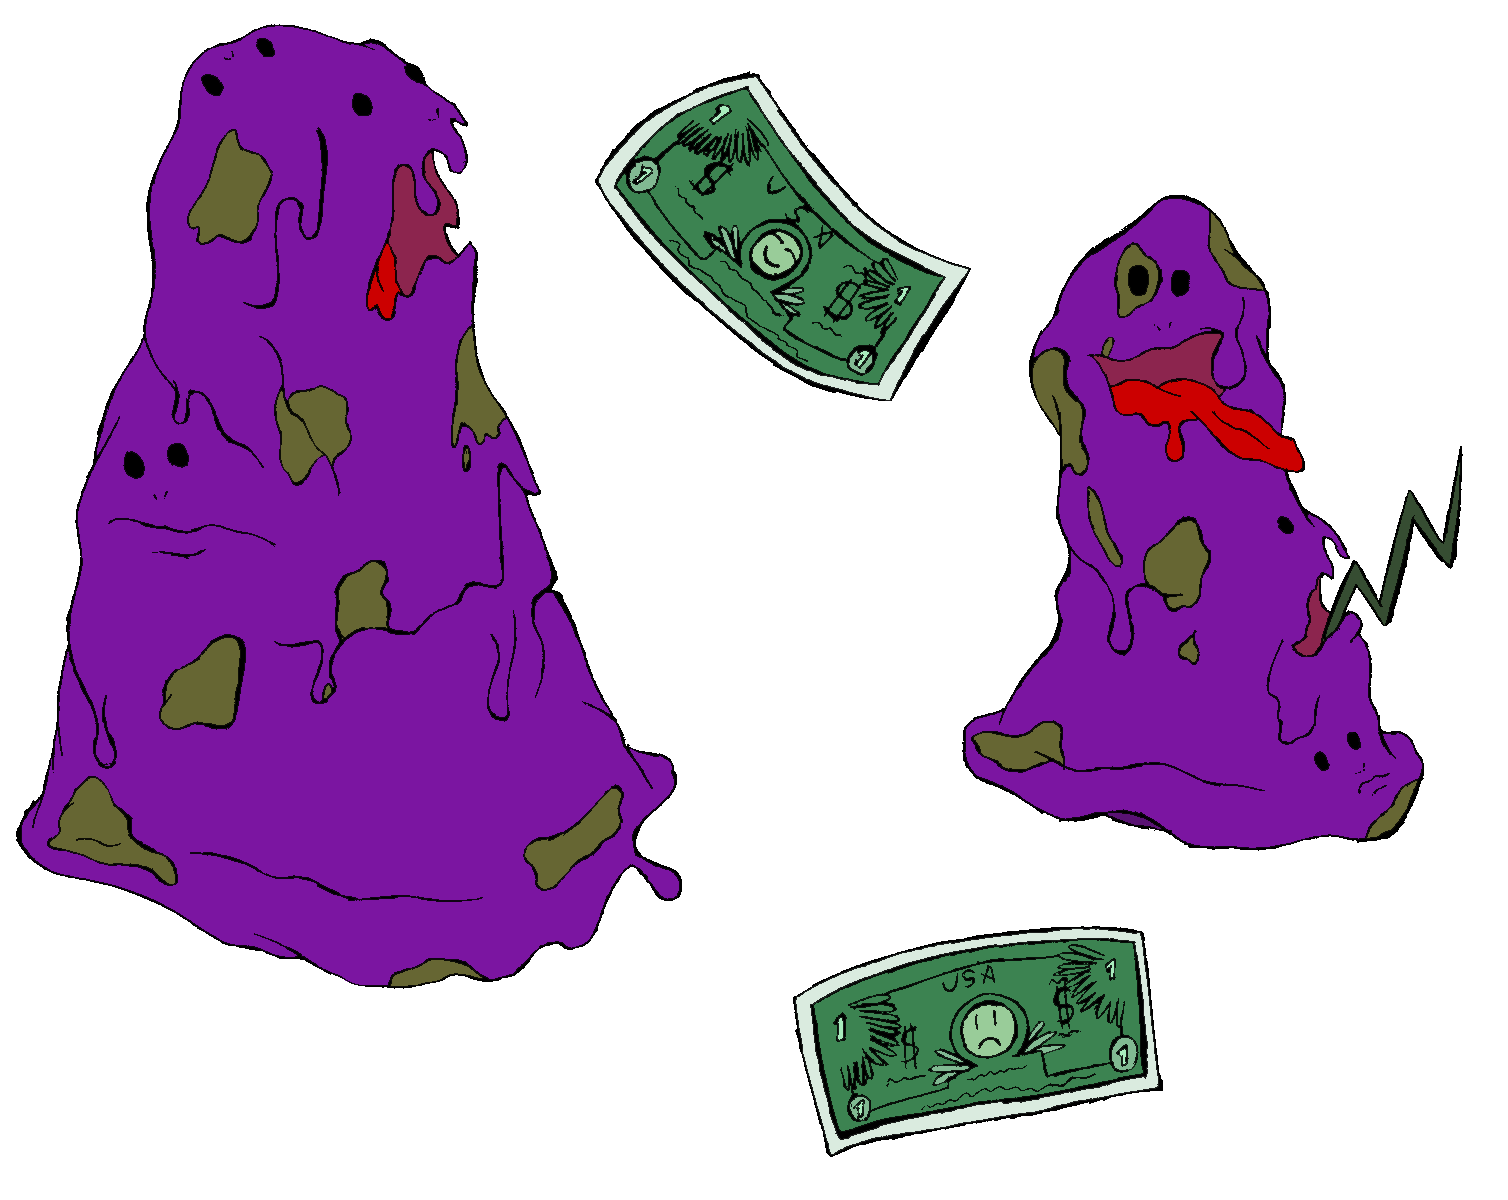 A Purple and Breen Polka-dotted Gobblygoop Monster with Three Faces by Living_Dead_Girl